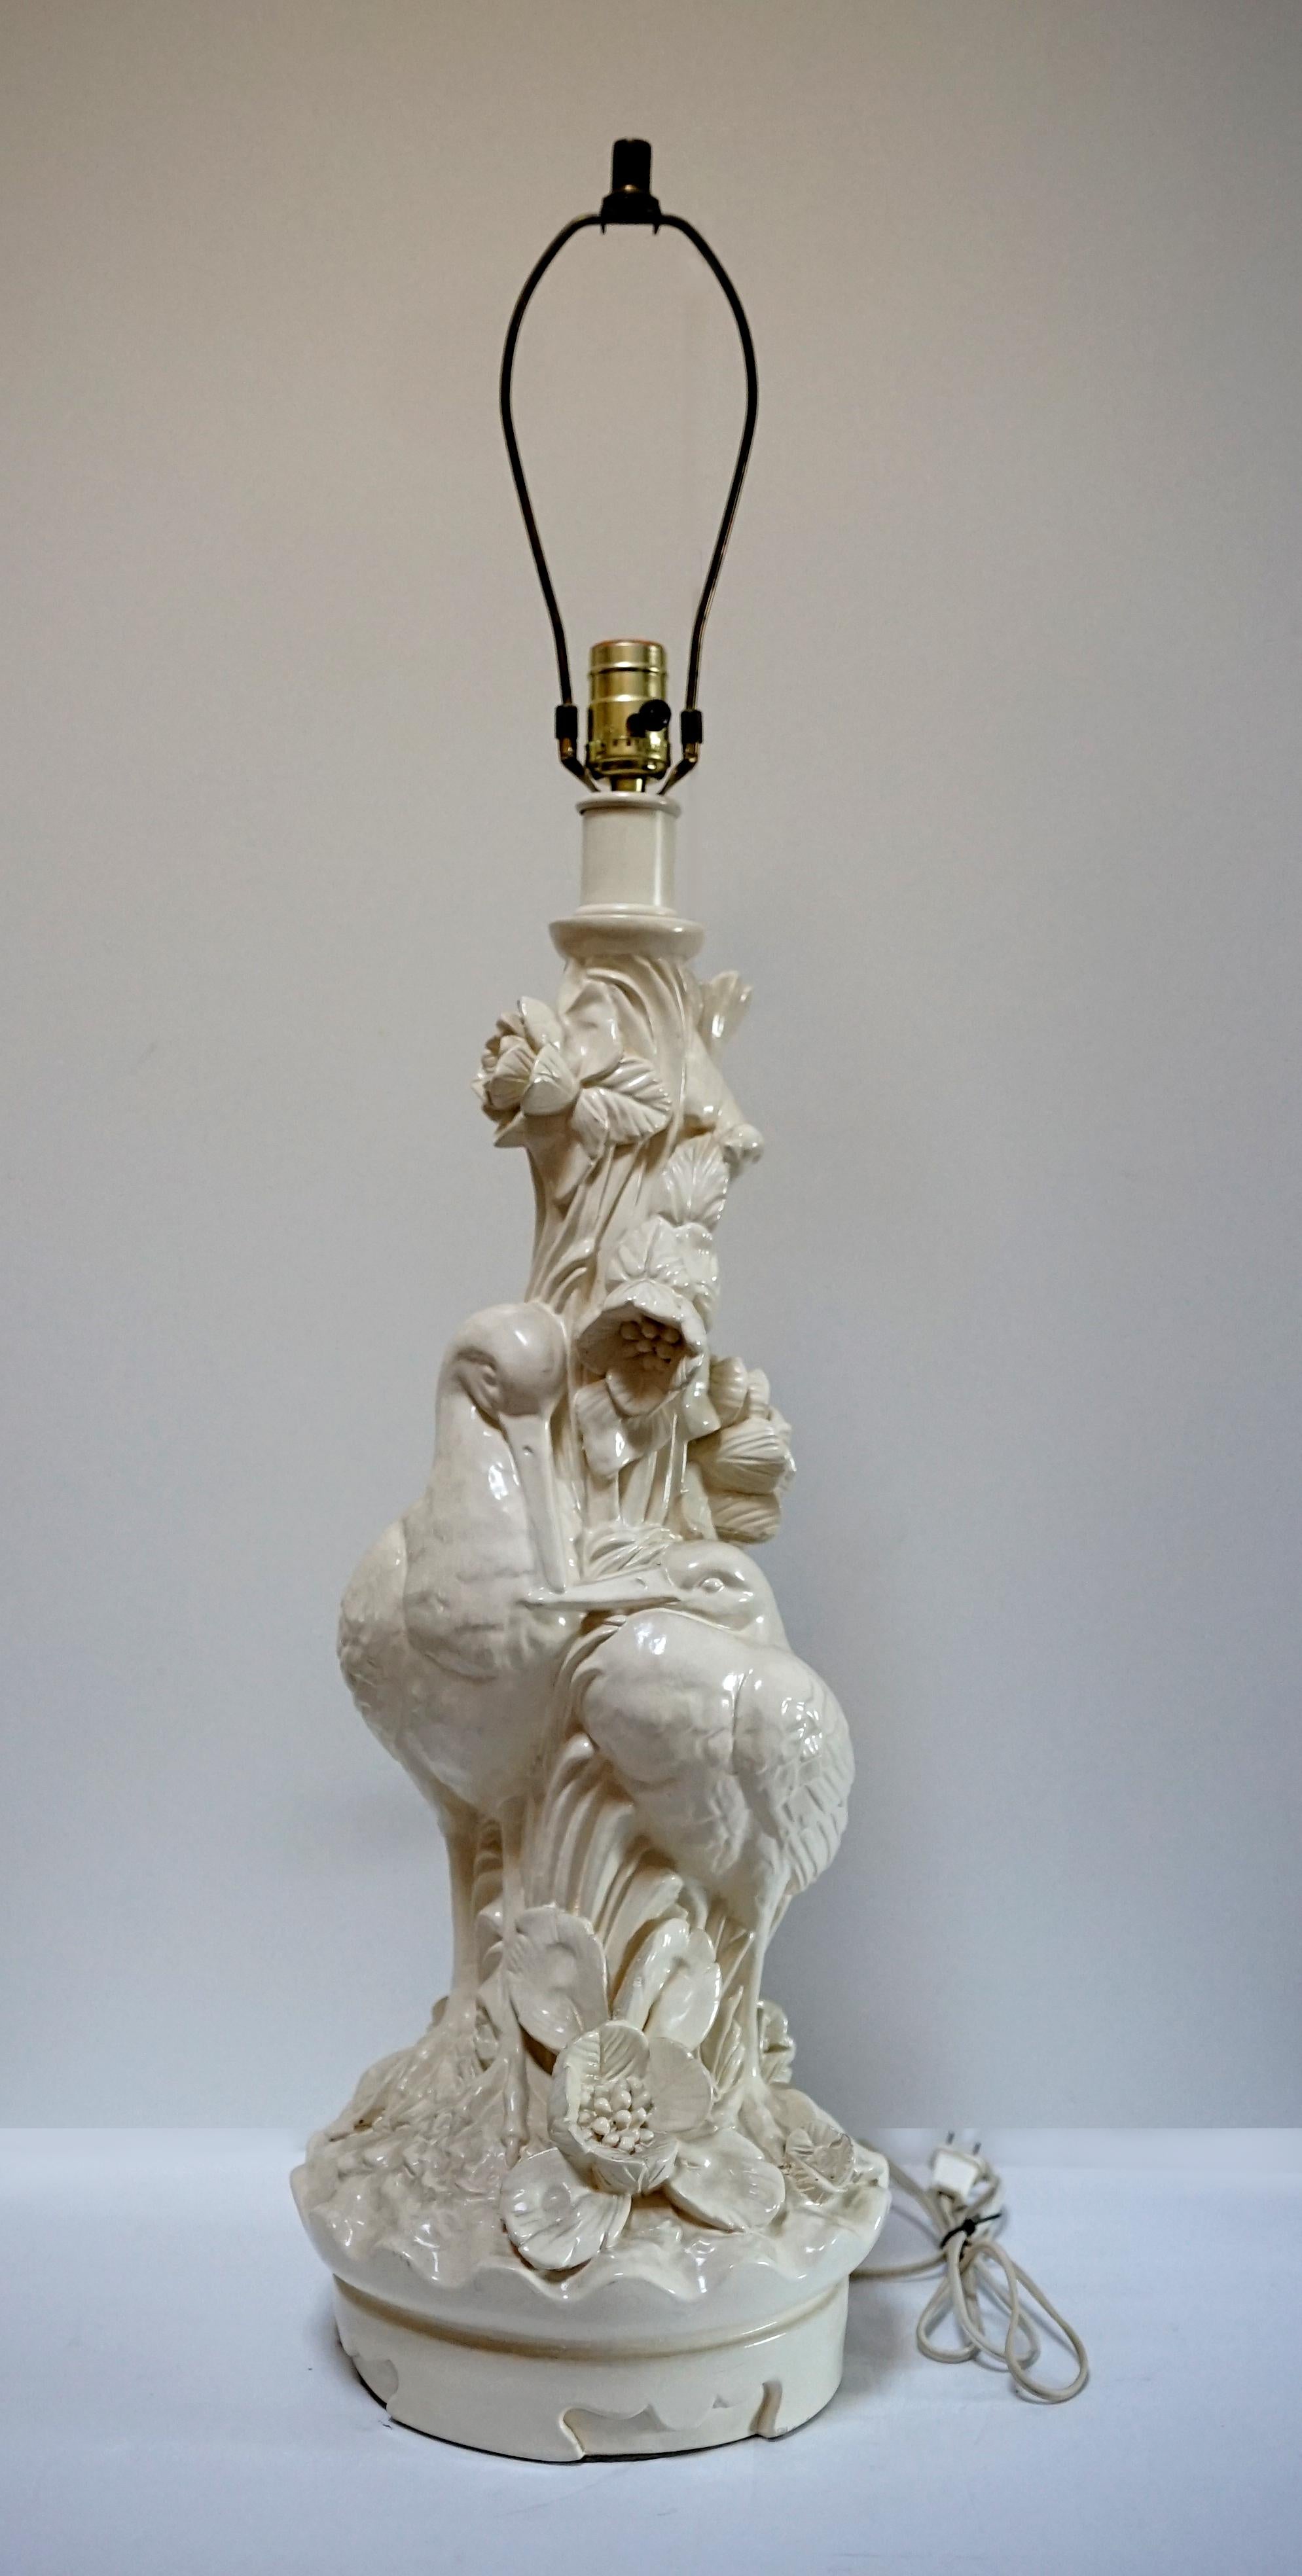 This is a rare piece from the art nouveau period. It is hard to believe your eyes--the sculpted lamp appears to be white porcelain--but look again. It is wood that mimics blanc de chine porcelain. Stunning.
A vintage carved and white painted